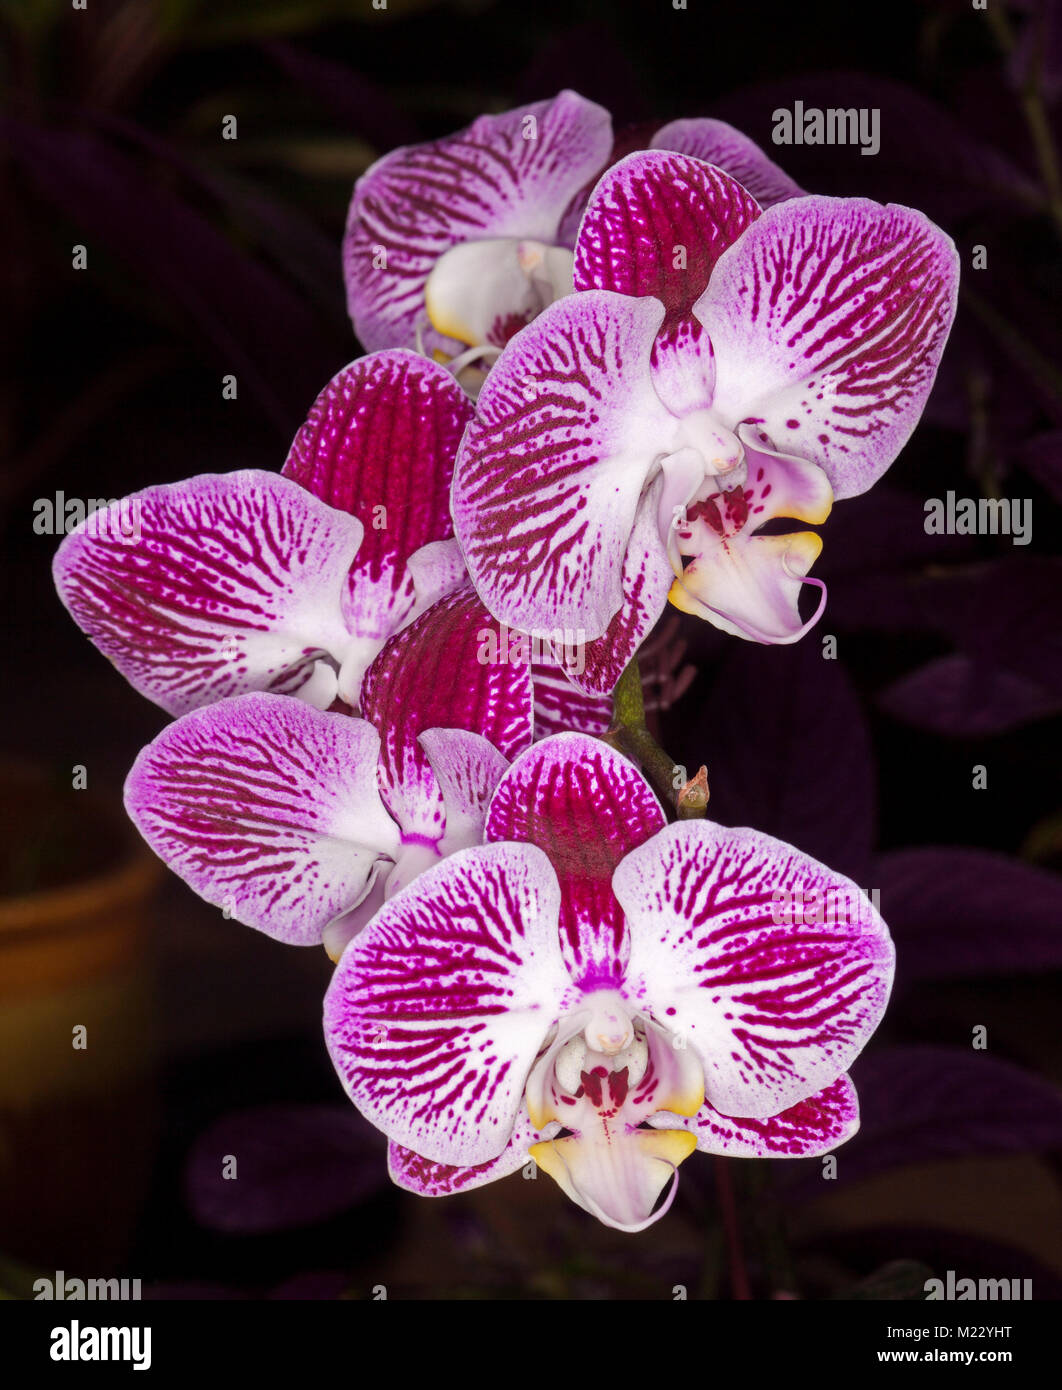 Cluster of spectacular vivid purple / magenta and white striped flowers of Phalaenopsis / moth orchid against dark background Stock Photo